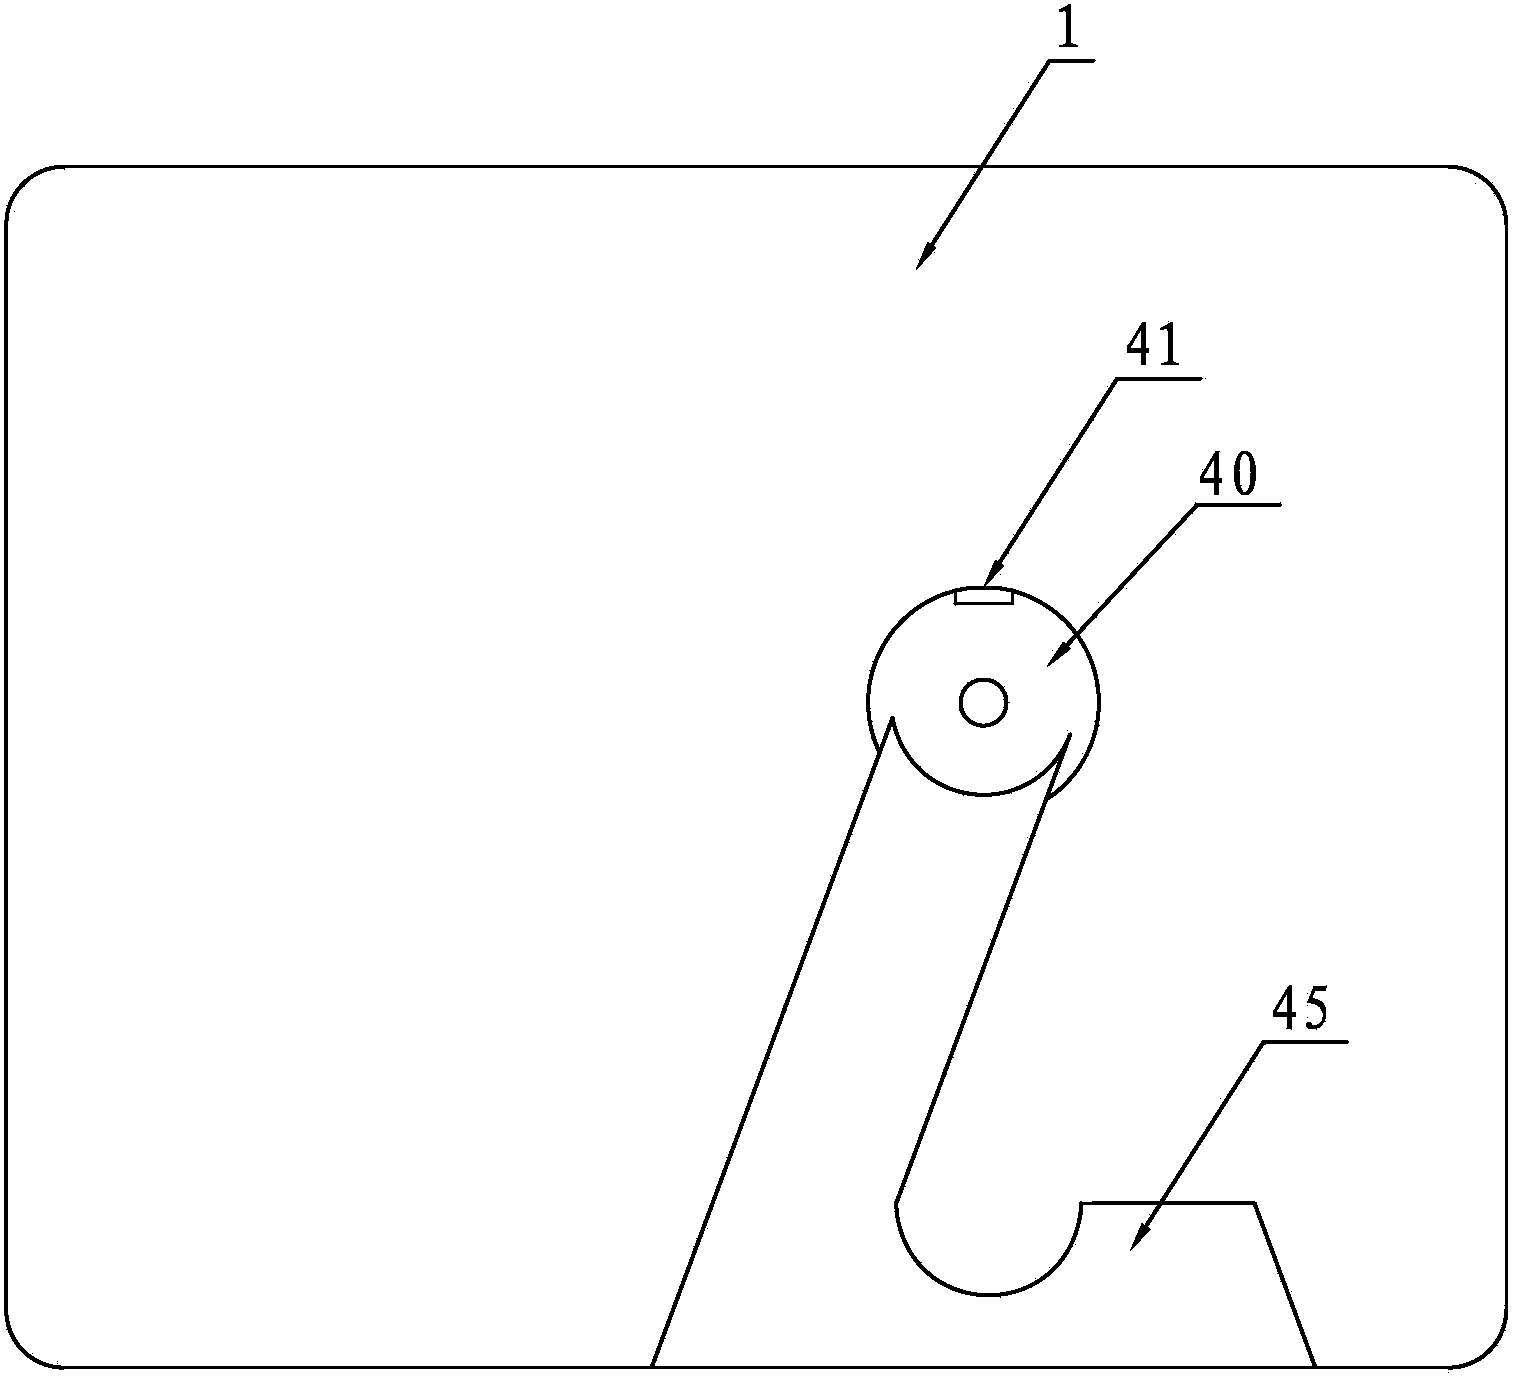 Digital television signal receiving device